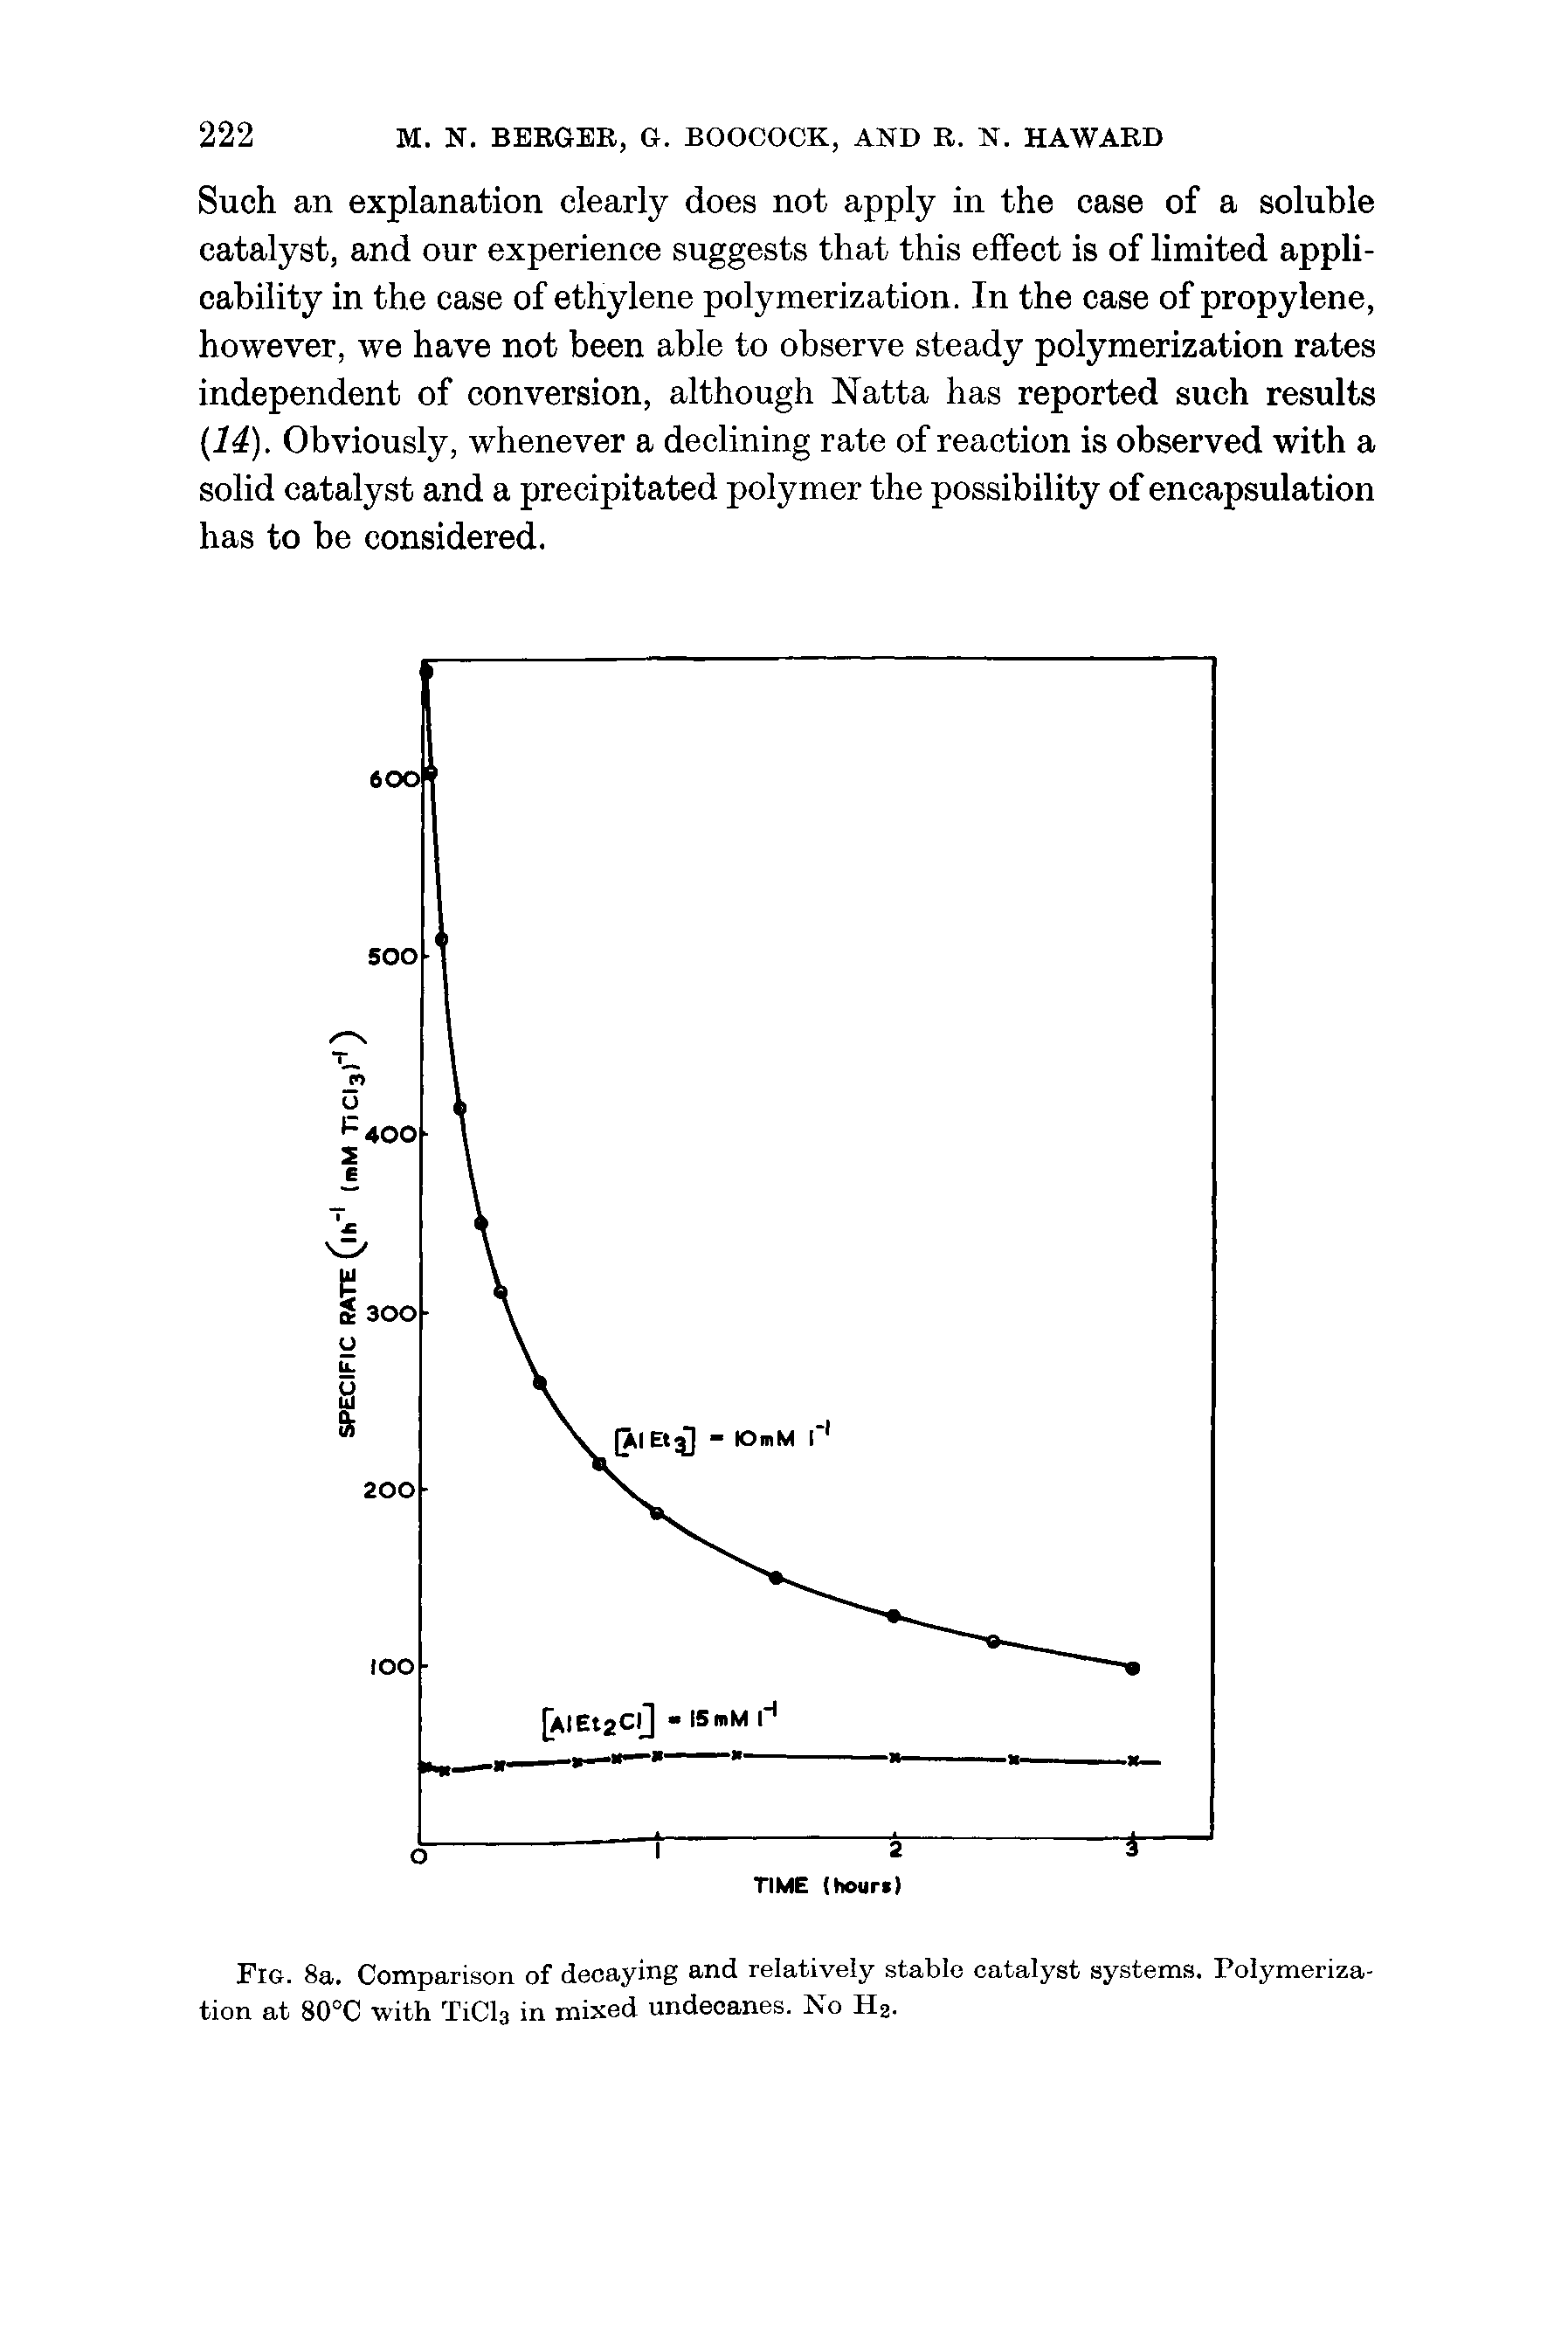 Fig. 8a. Comparison of decaying and relatively stable catalyst systems. Polymerization at 80°C with TiCla in mixed undeoanes. No Ha.